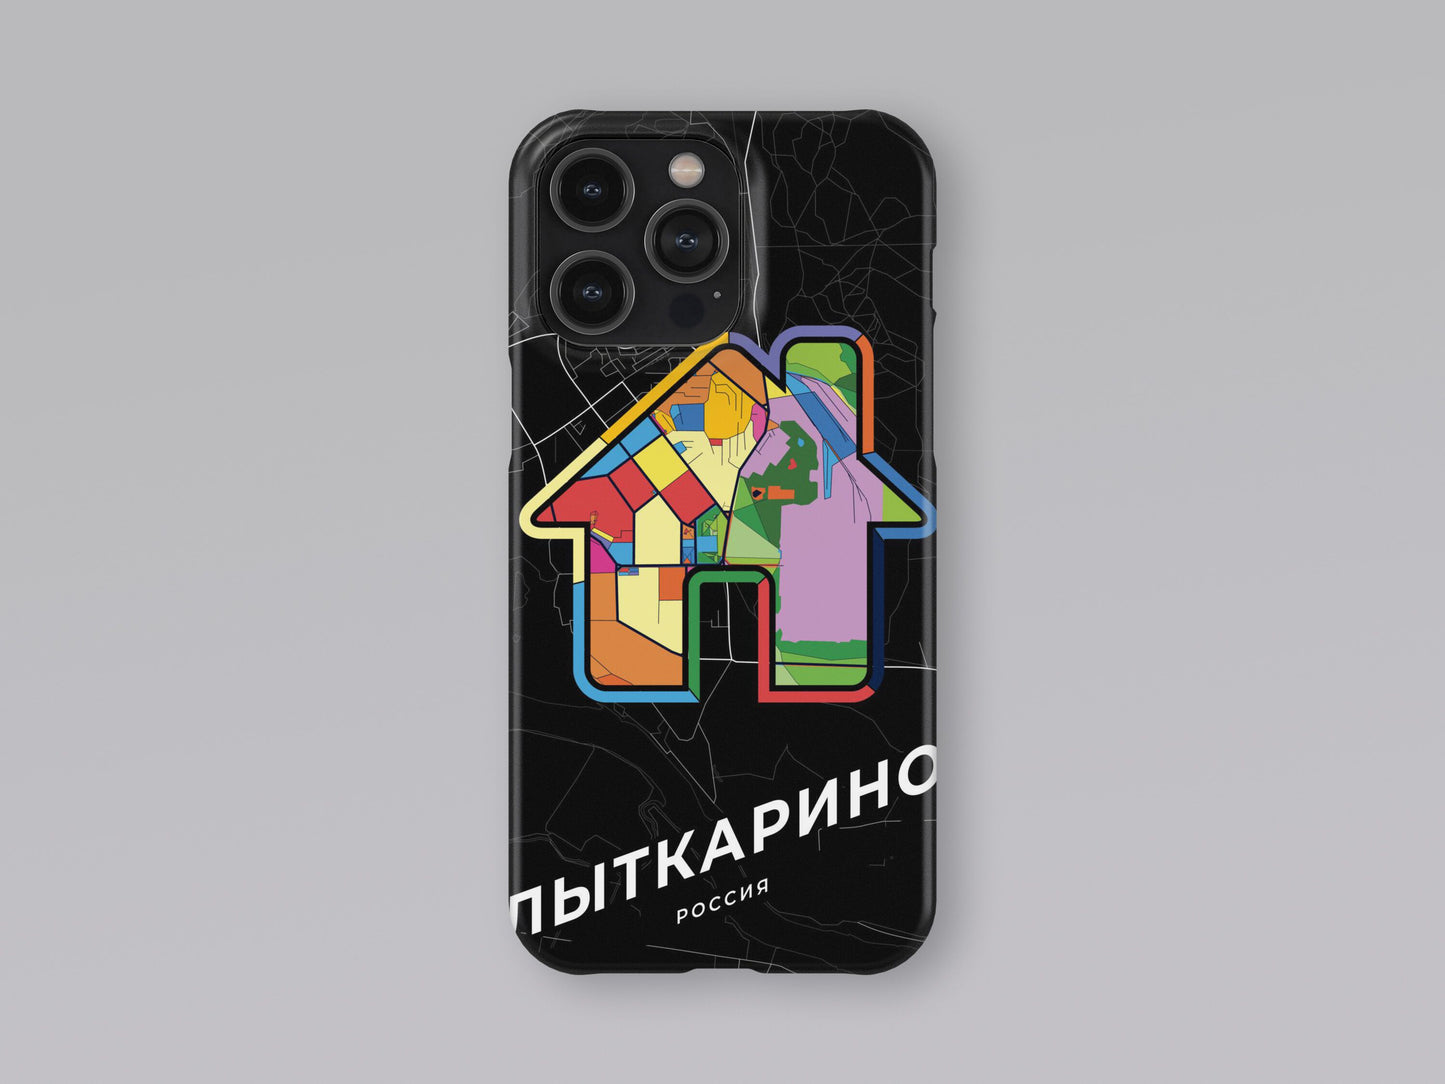 Lytkarino Russia slim phone case with colorful icon. Birthday, wedding or housewarming gift. Couple match cases. 3